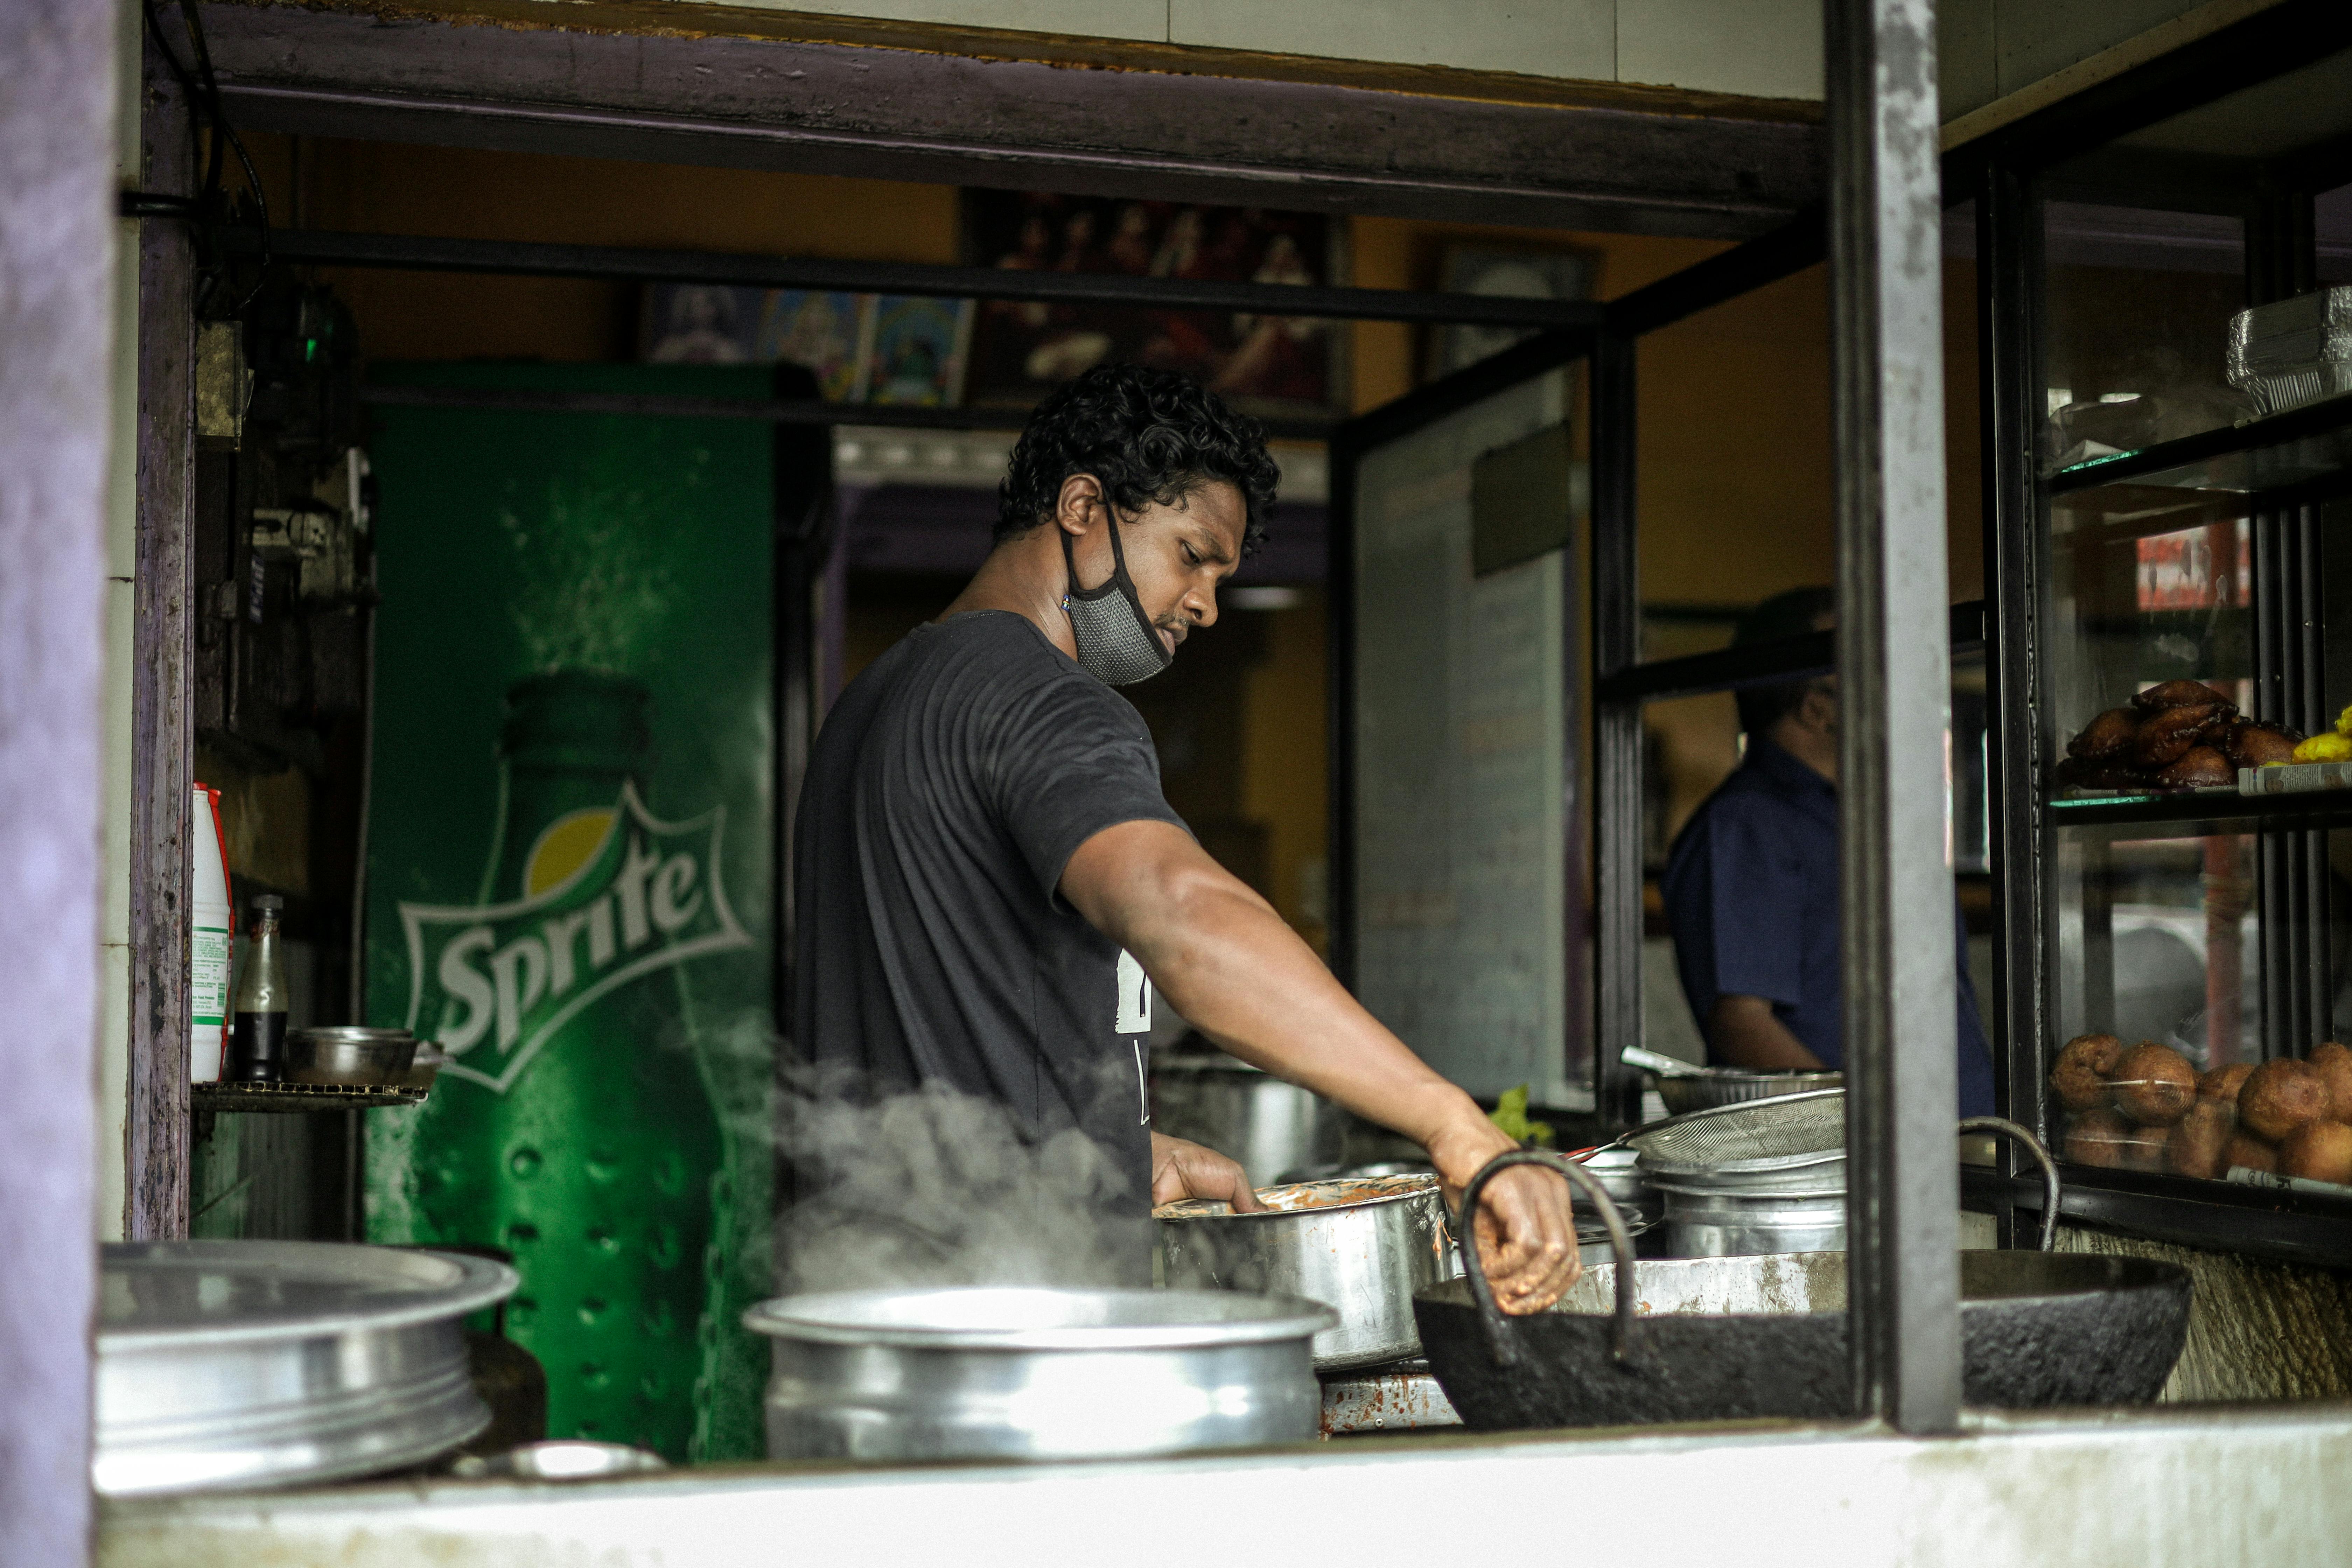 A man cooking food in a large pot photo – Free Food Image on Unsplash